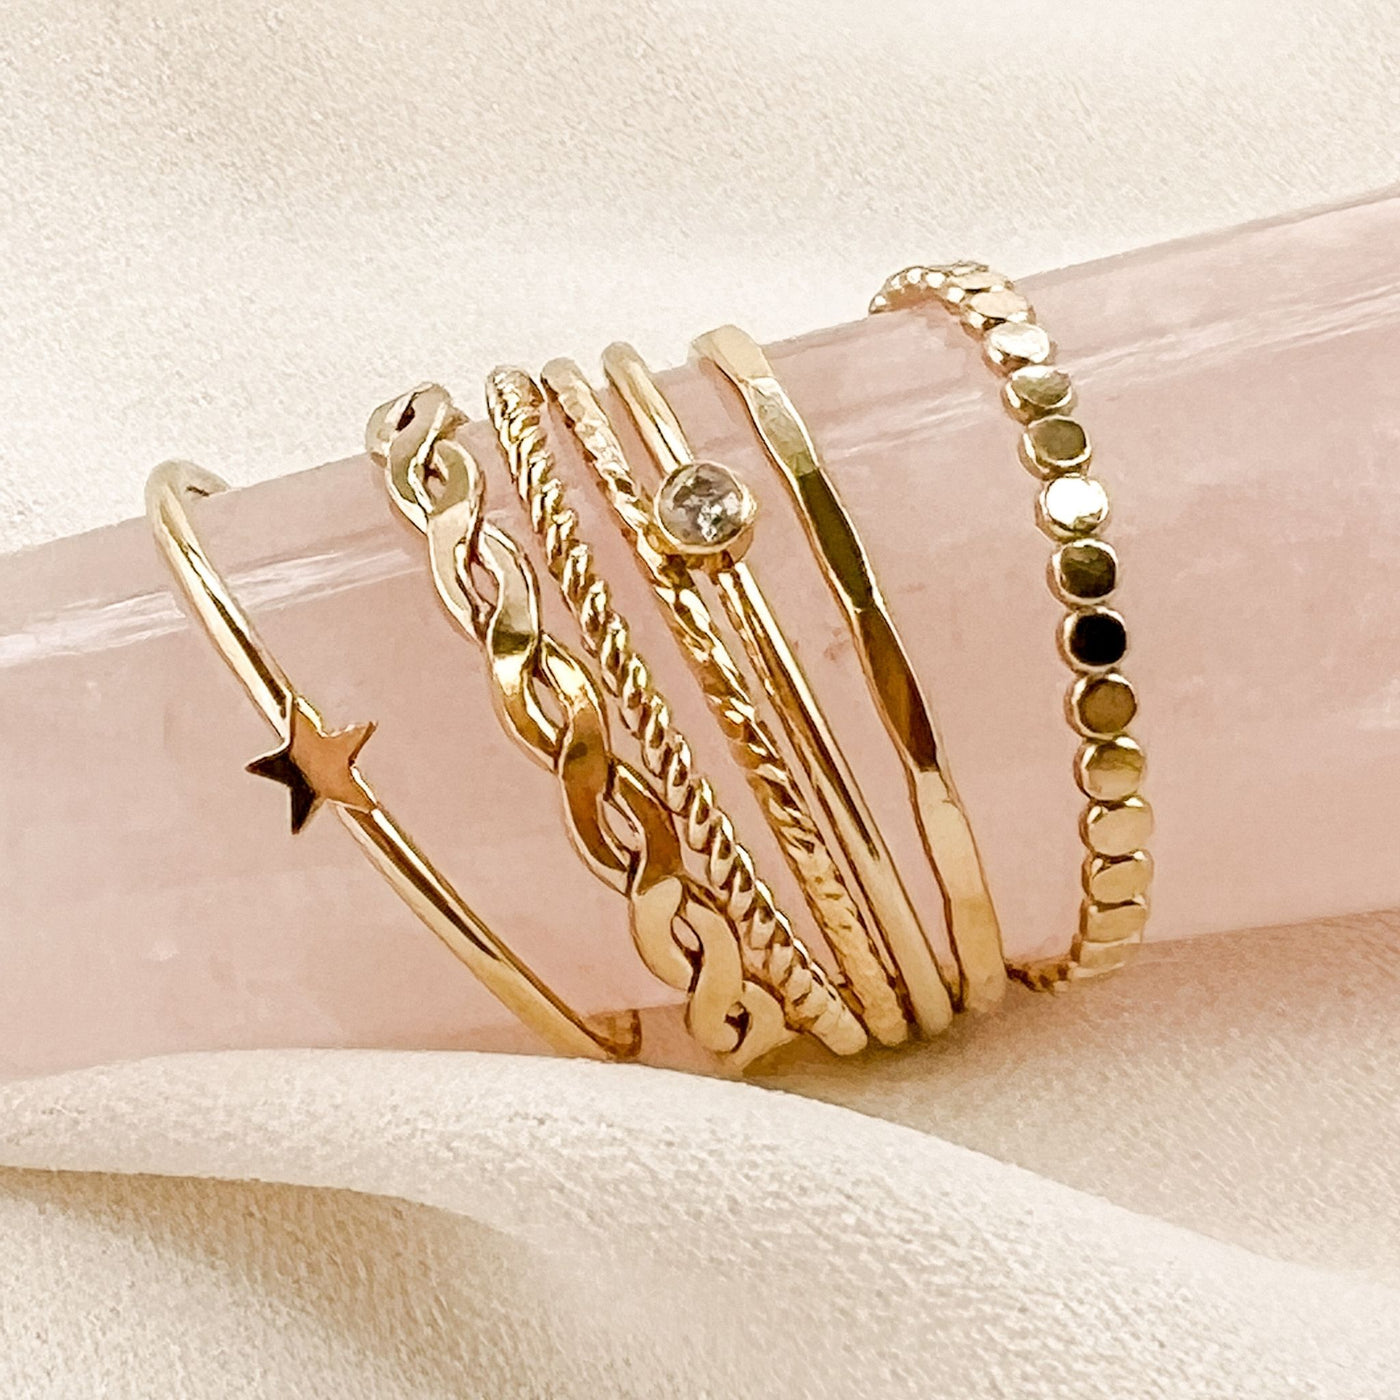 Assortment of differing styles of minimalist and dainty women’s stacking rings displayed on pink rose quartz crystal